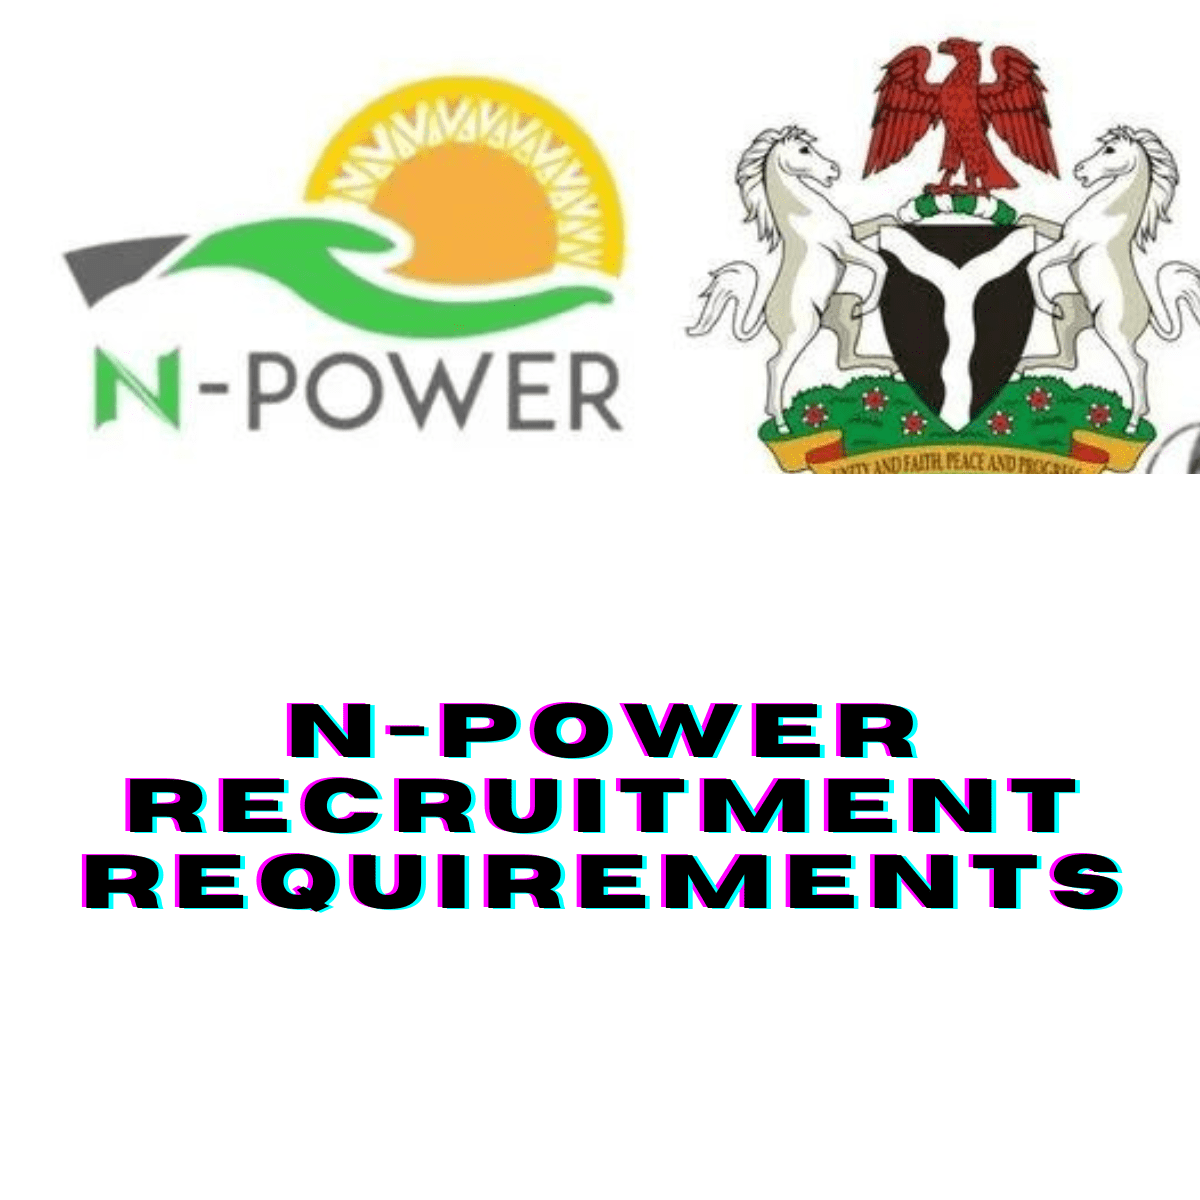 N Power Recruitment Requirements A Comprehensive Guide